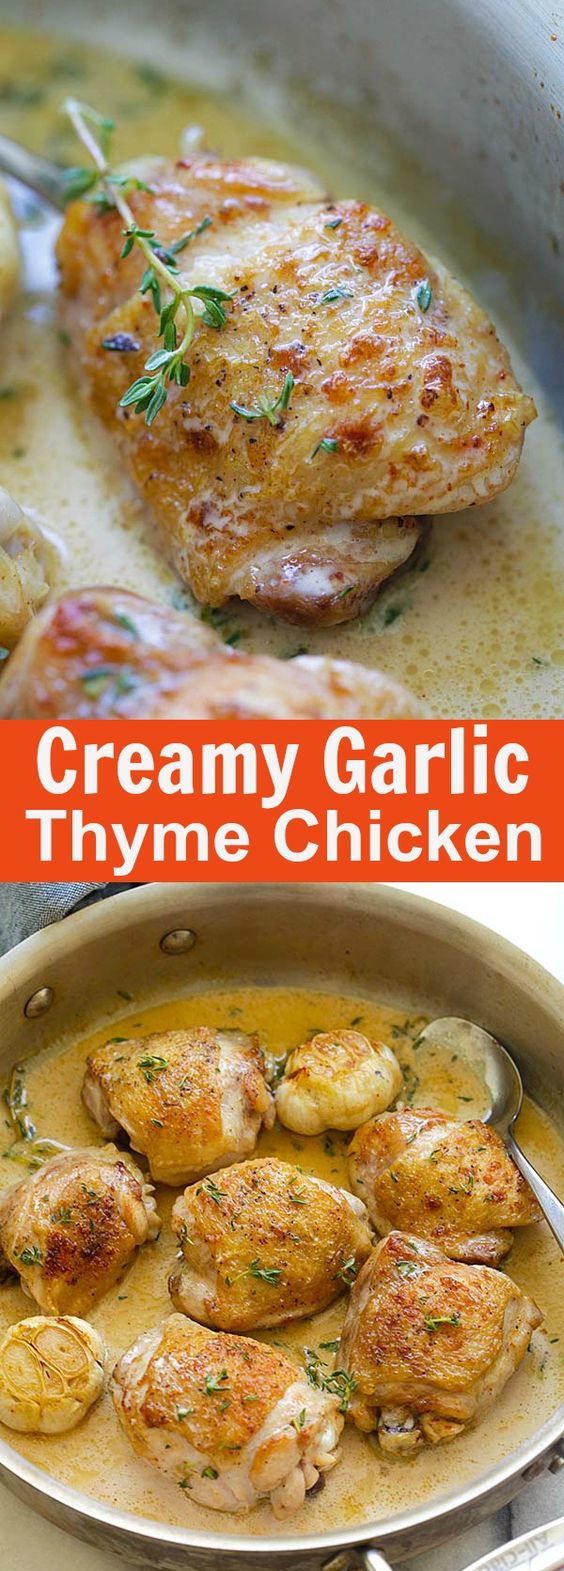 Creamy Garlic Thyme Chicken – delicious pan-fried chicken in a creamy garlic thyme sauce. Easy one-skillet chicken dinner is ready in 20 mins | rasamalaysia.com